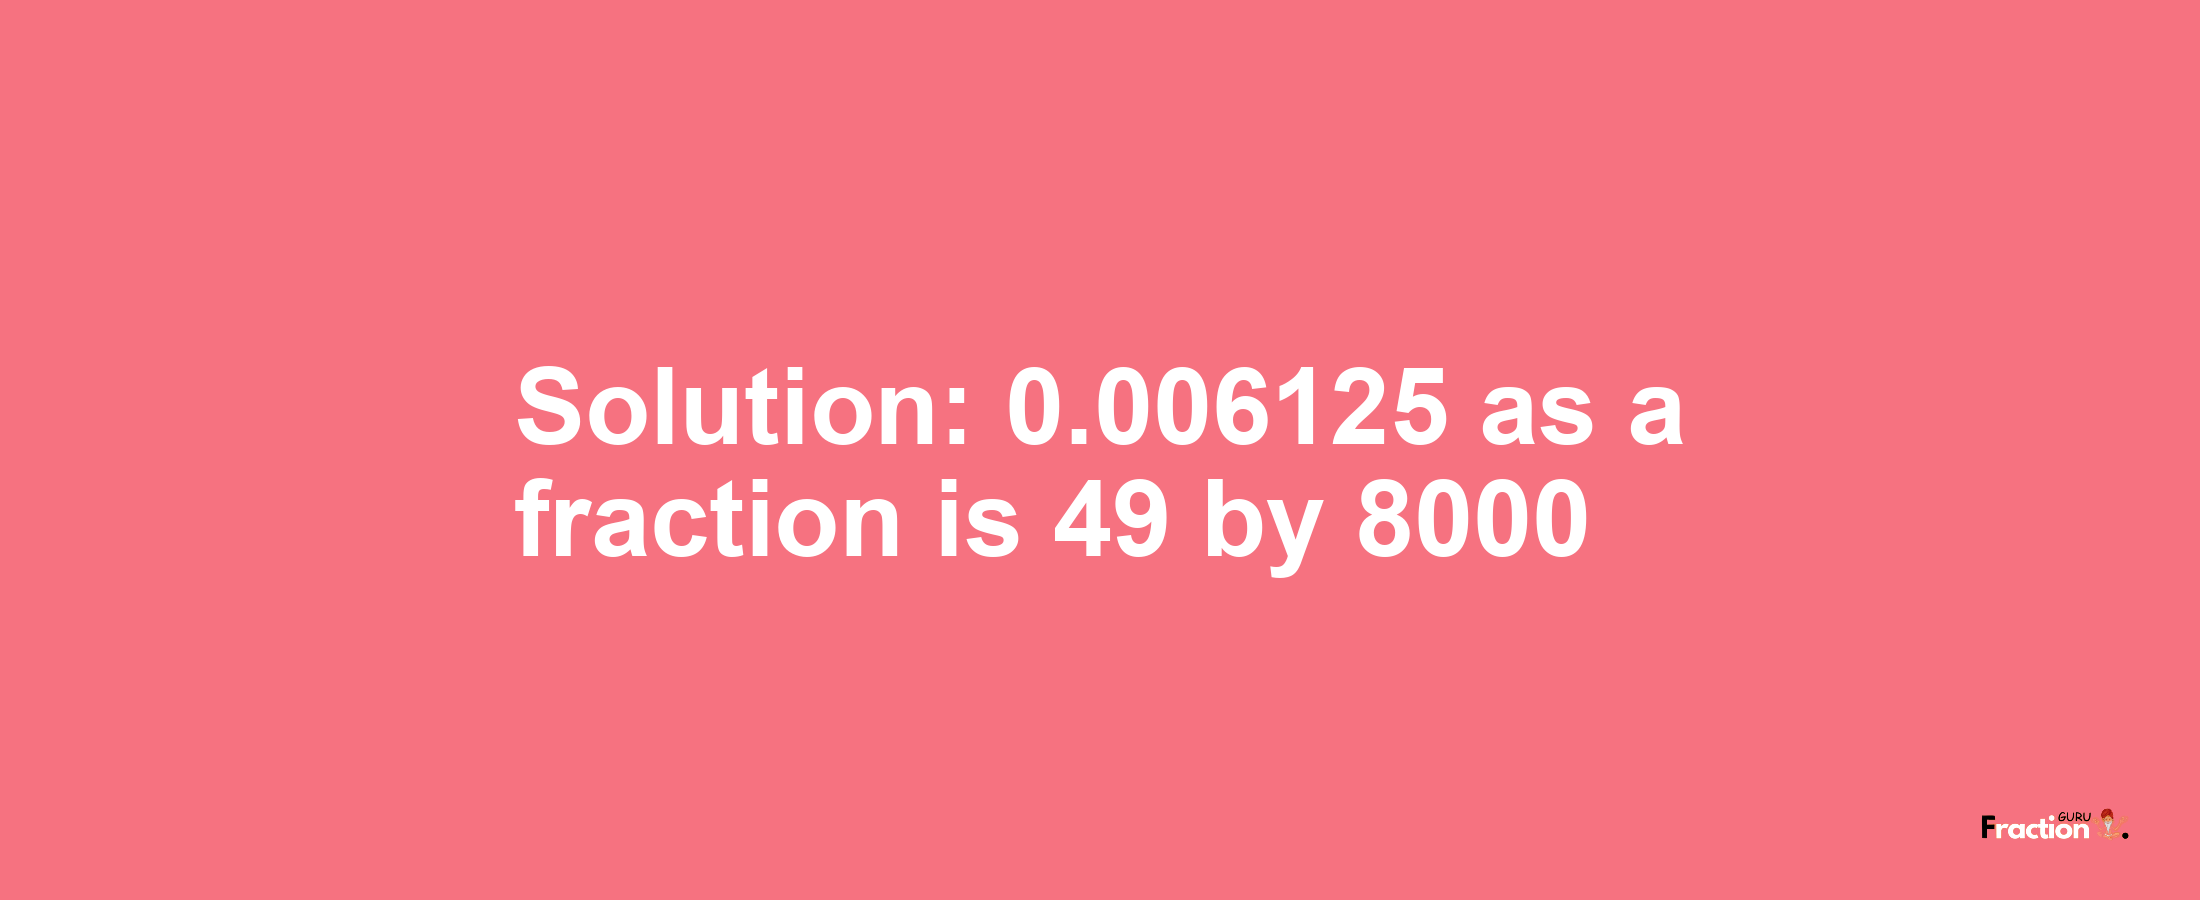 Solution:0.006125 as a fraction is 49/8000